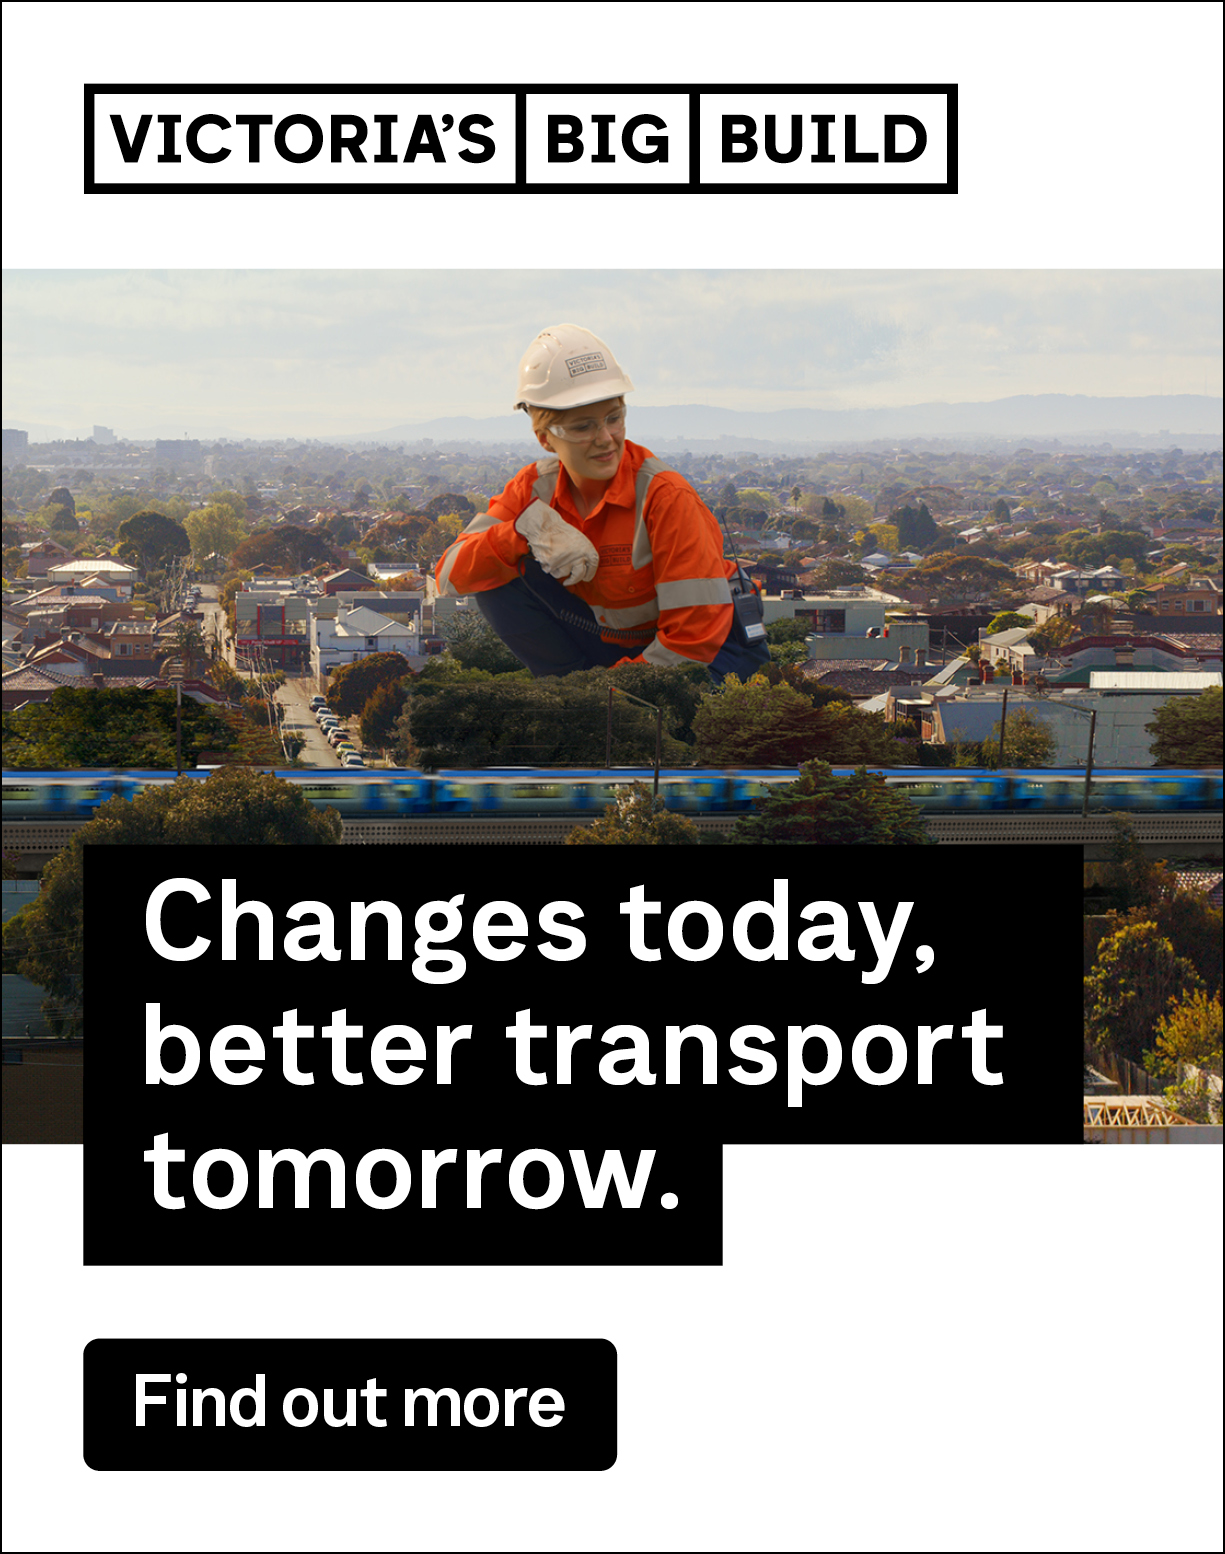 Victoria's big build. Changes today, better transport tomorrow, find out more